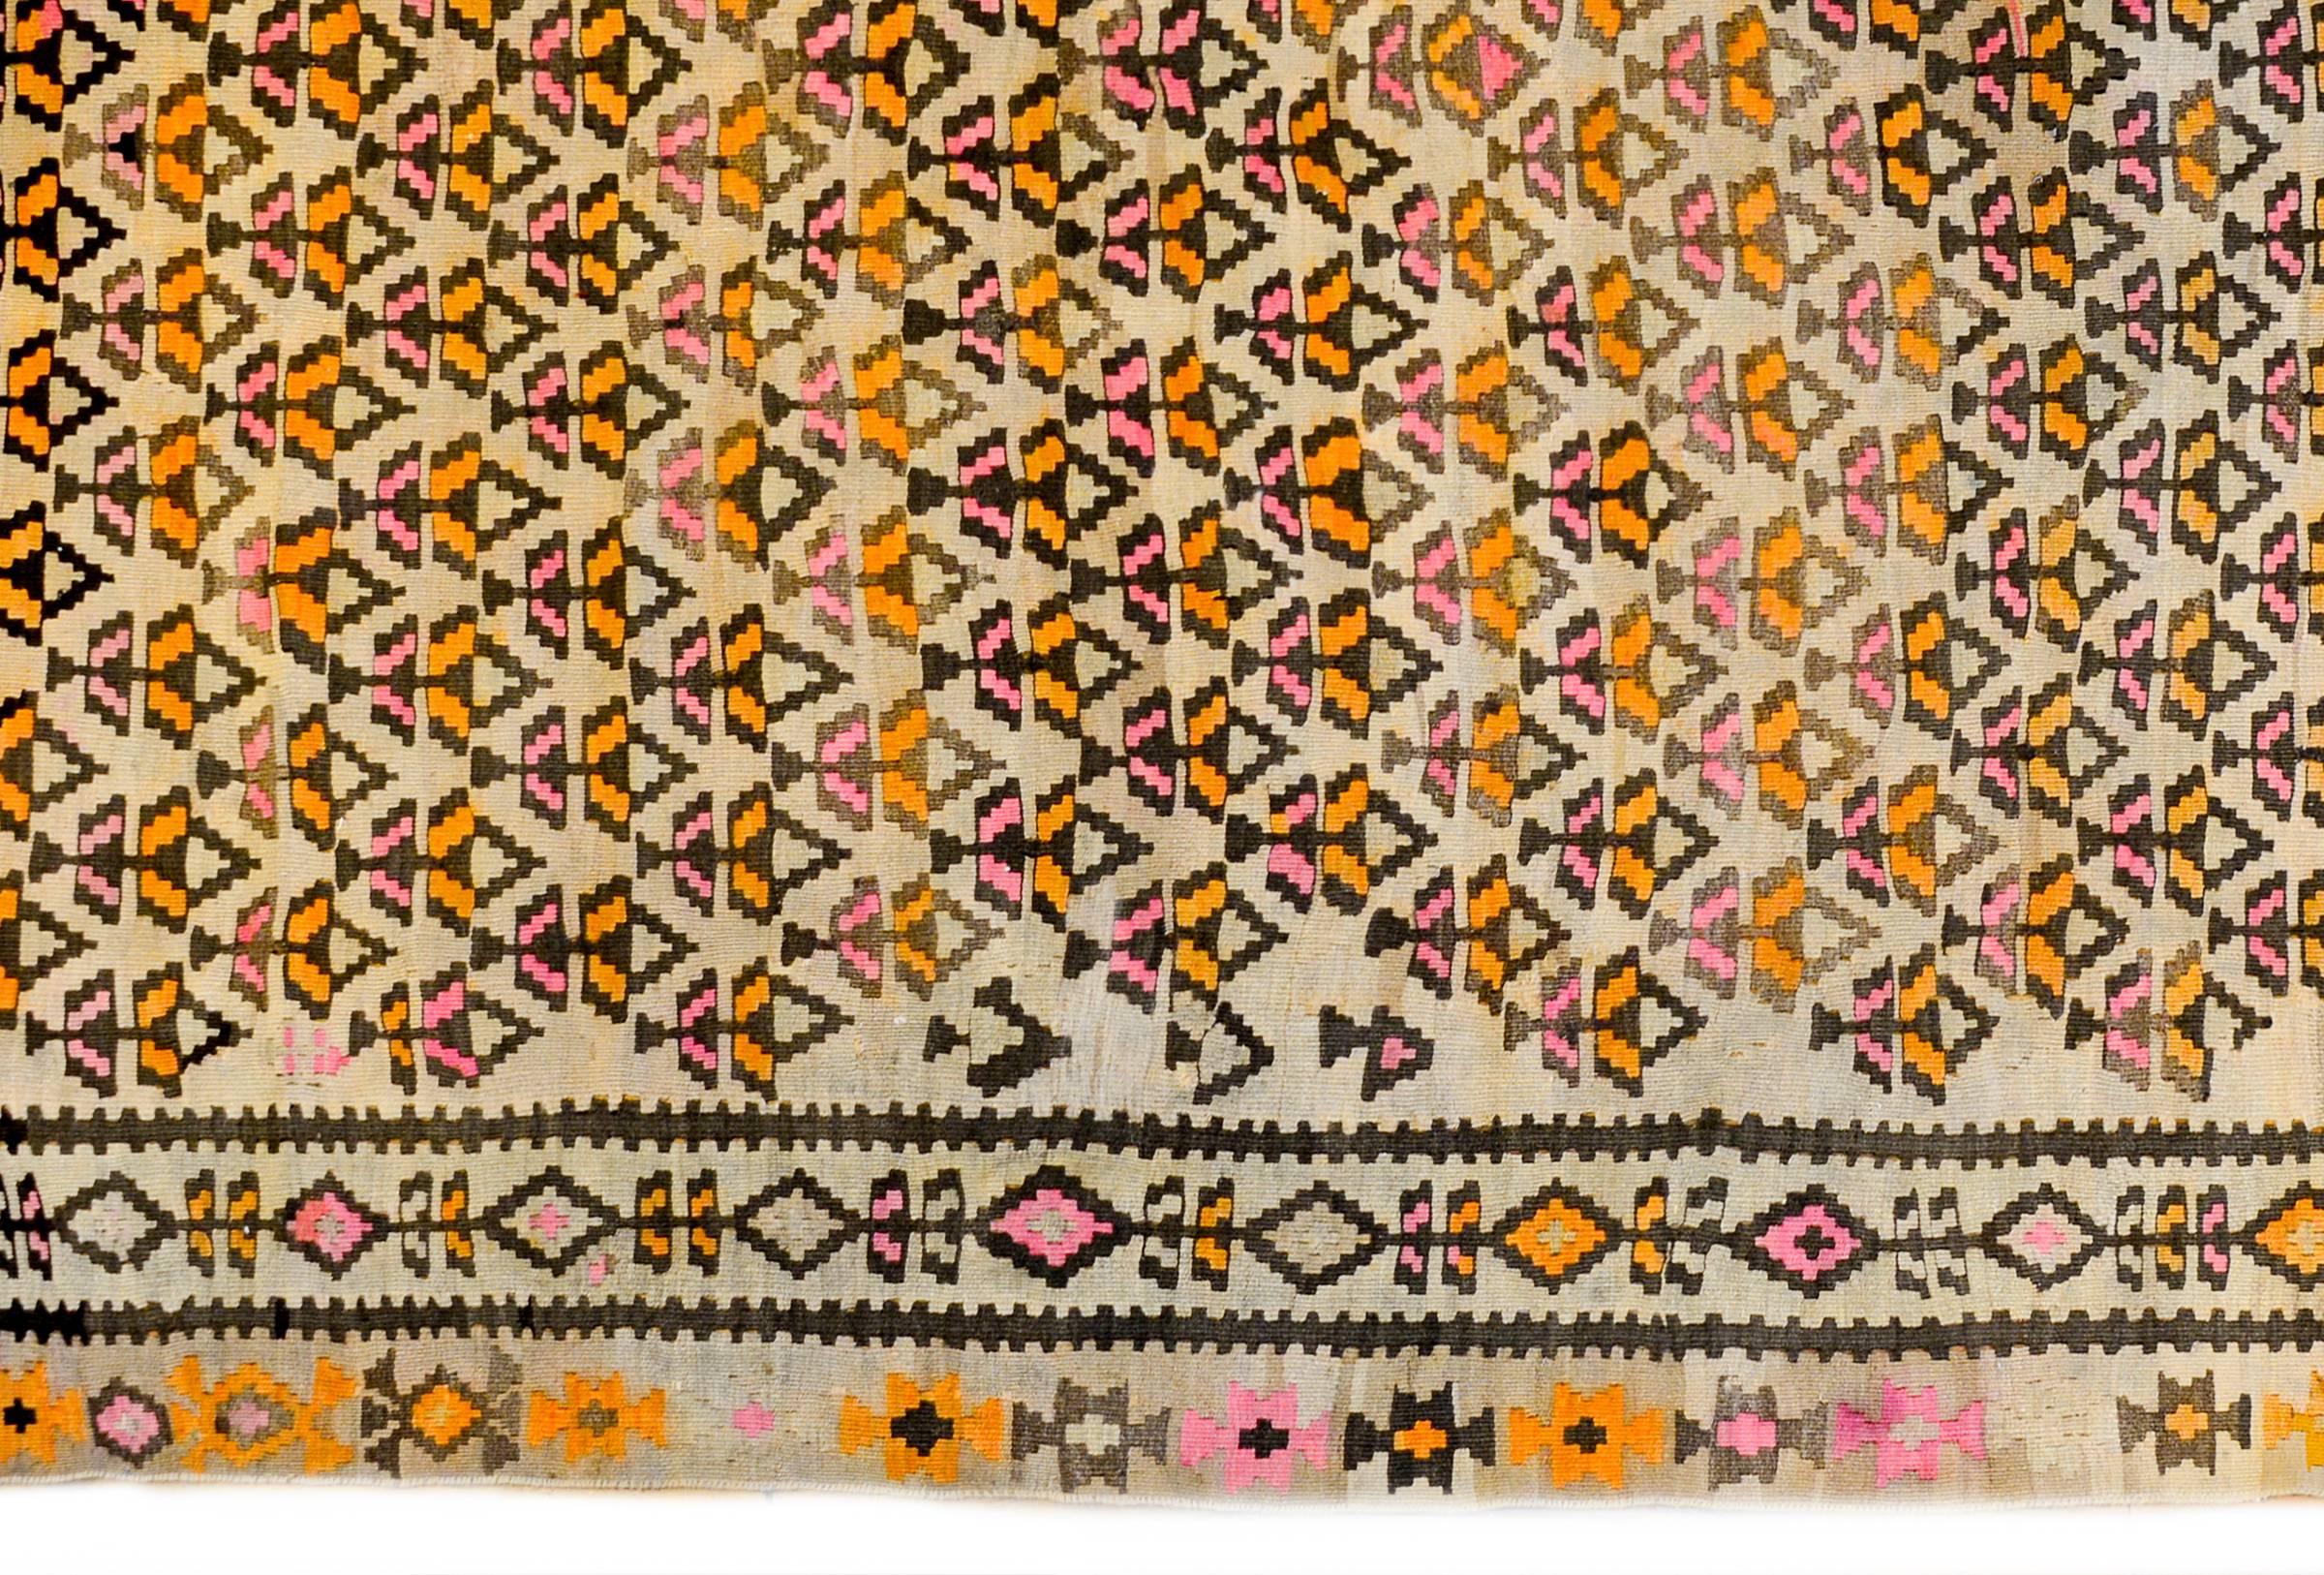 An exceptional early 20th century Persian Qazvin Kilim runner with a wonderful all-over multicolored stylized tree-of-life pattern across the field woven in black and orange vegetable dyed wool on a natural cream colored wool background. The border